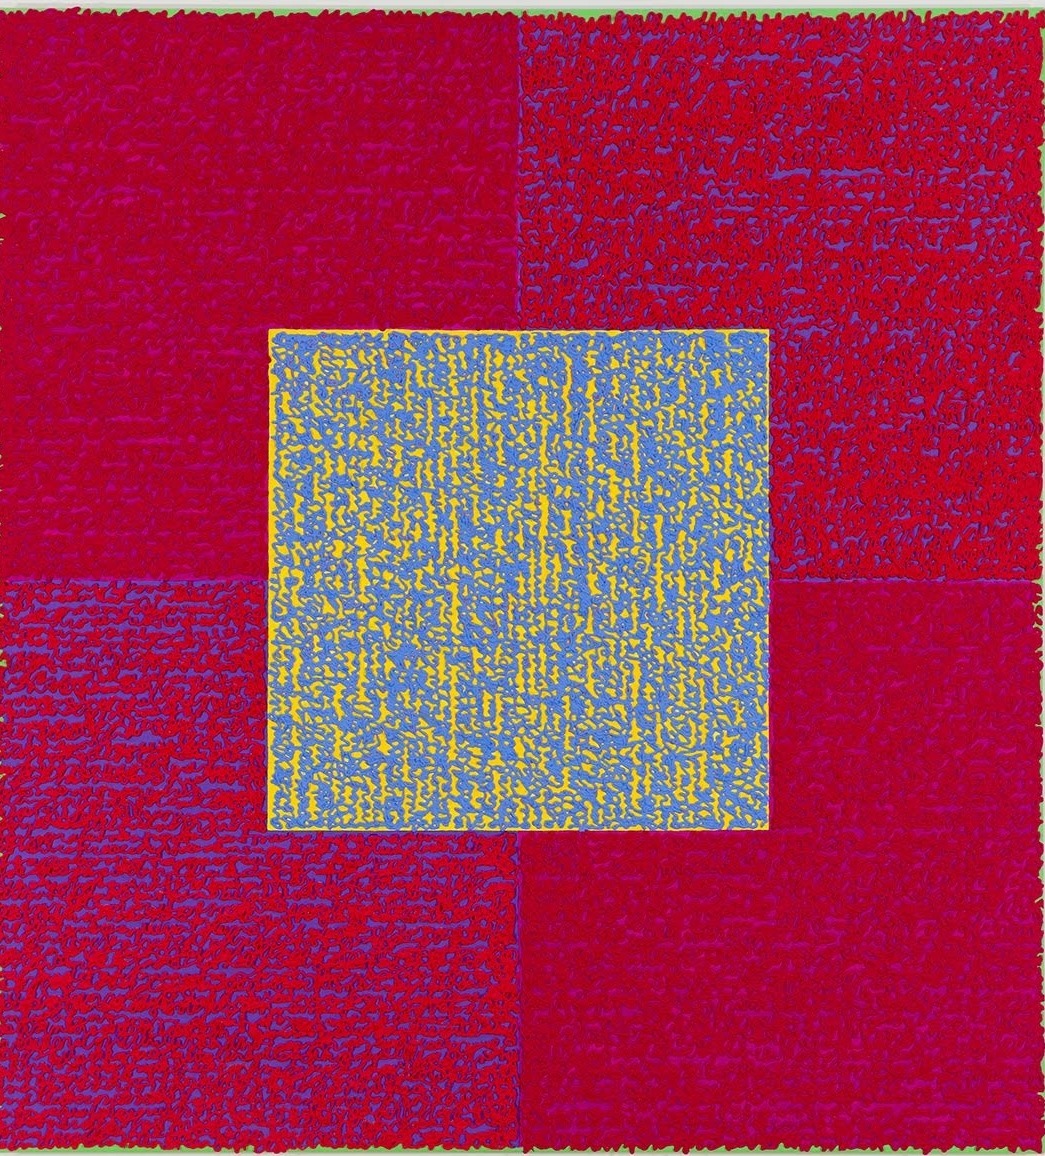 Louise P. Sloane, BURTRYB, 2014, Acrylic paint and pastes on aluminum panel, 50 x 46 inches, signed, titled and dated on the verso, four rectangles and a central square (magenta, and purple) with personal text written over the squares in pink and blue to create three dimensional texture. Louise P. Sloane has been creating abstract paintings since 1974, embracing minimalist techniques and the beauty of color and texture.